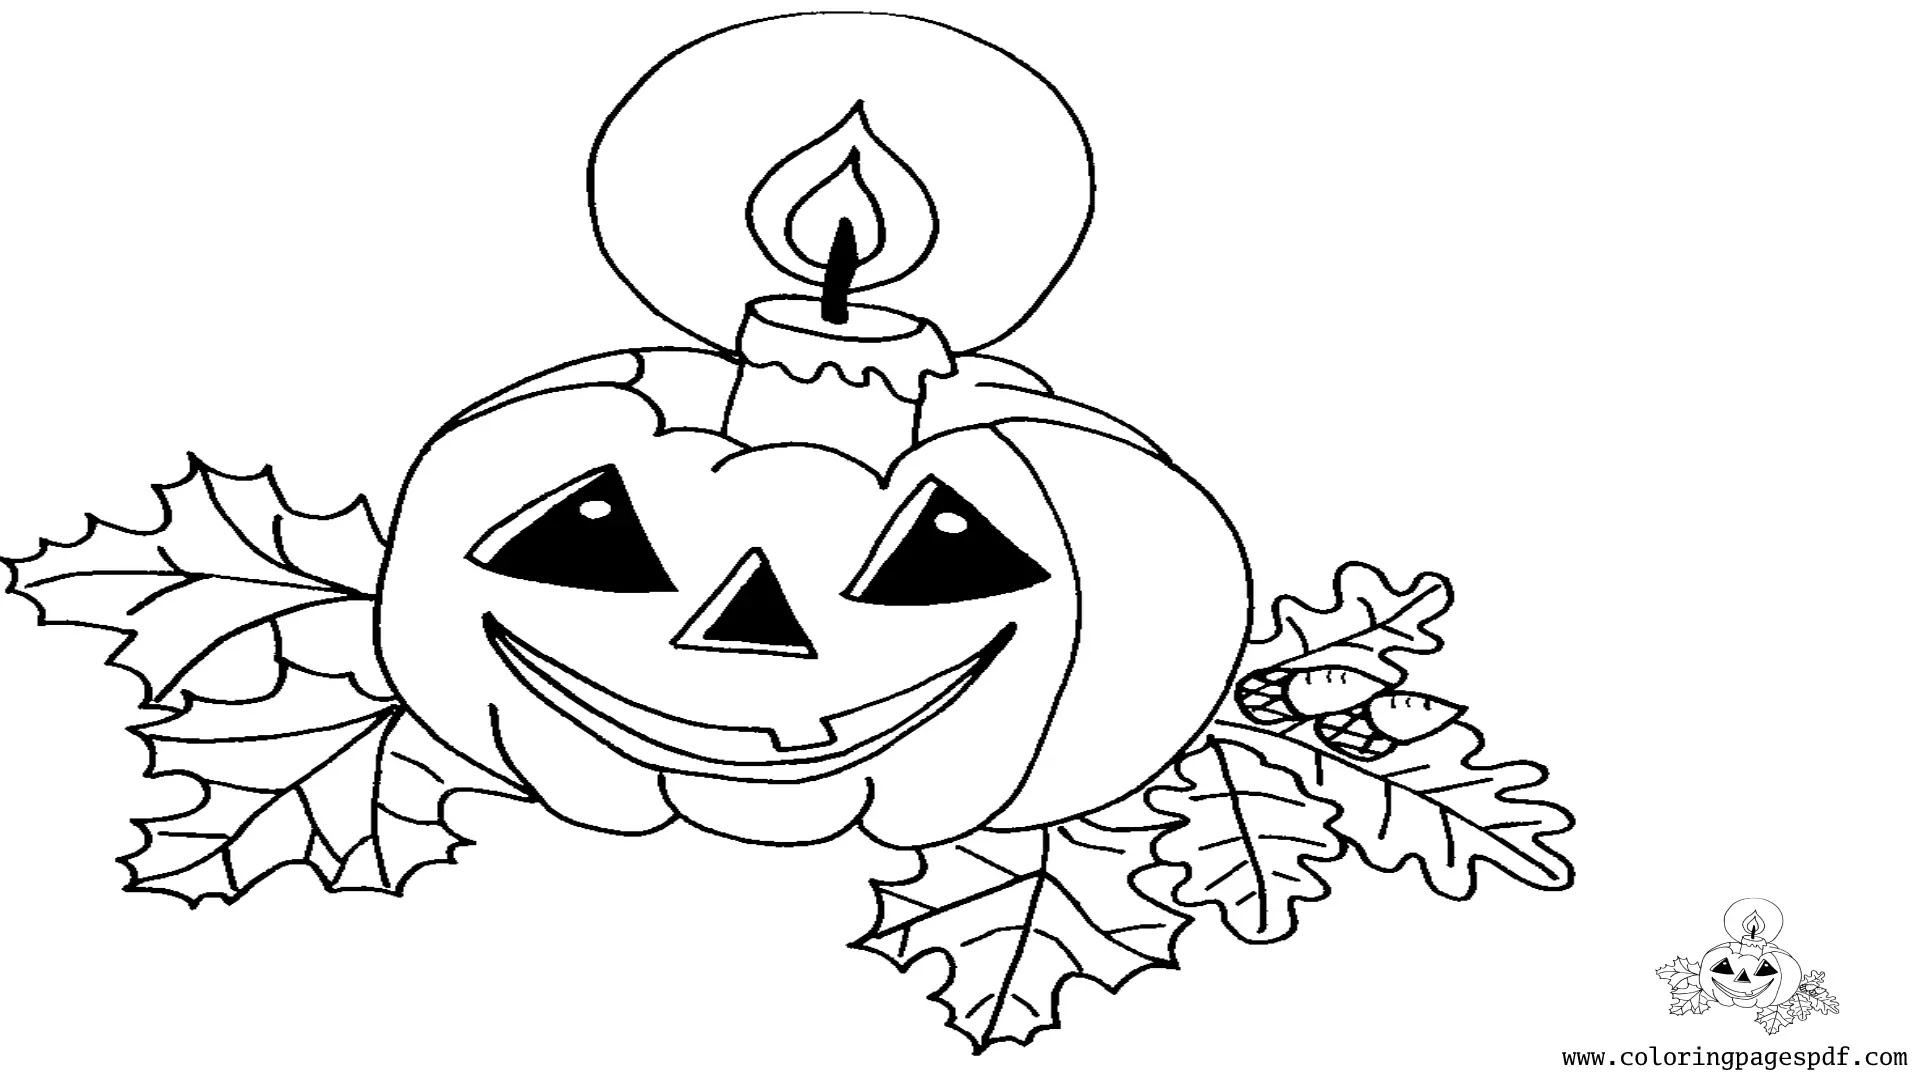 Coloring Page Of A Candle Inside A Pumpkin